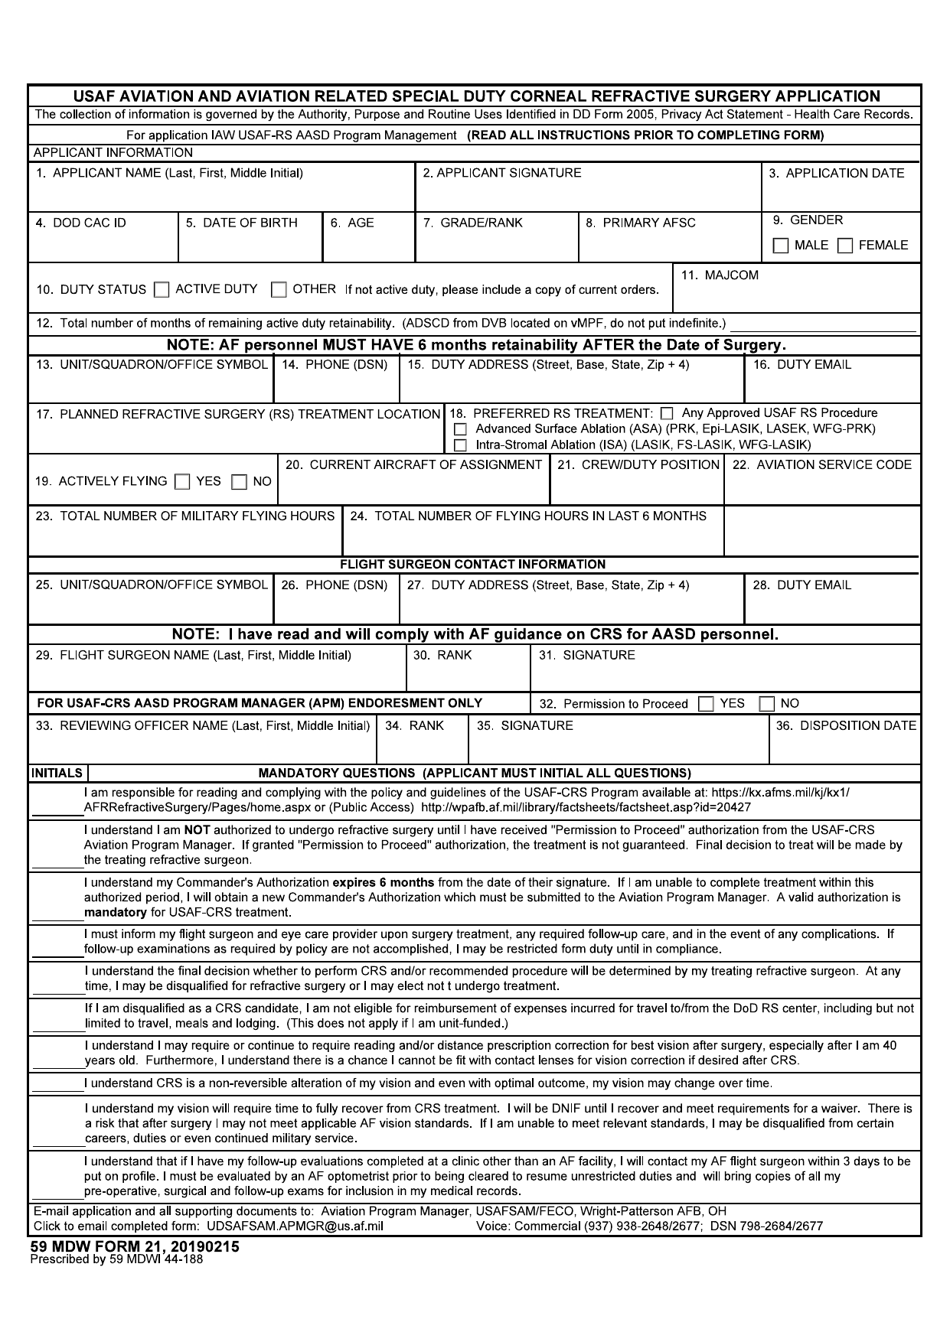 59 MDW Form 21 USAF Aviation  Aviation Related Special Duty Corneal Refractive Surgery Application, Page 1